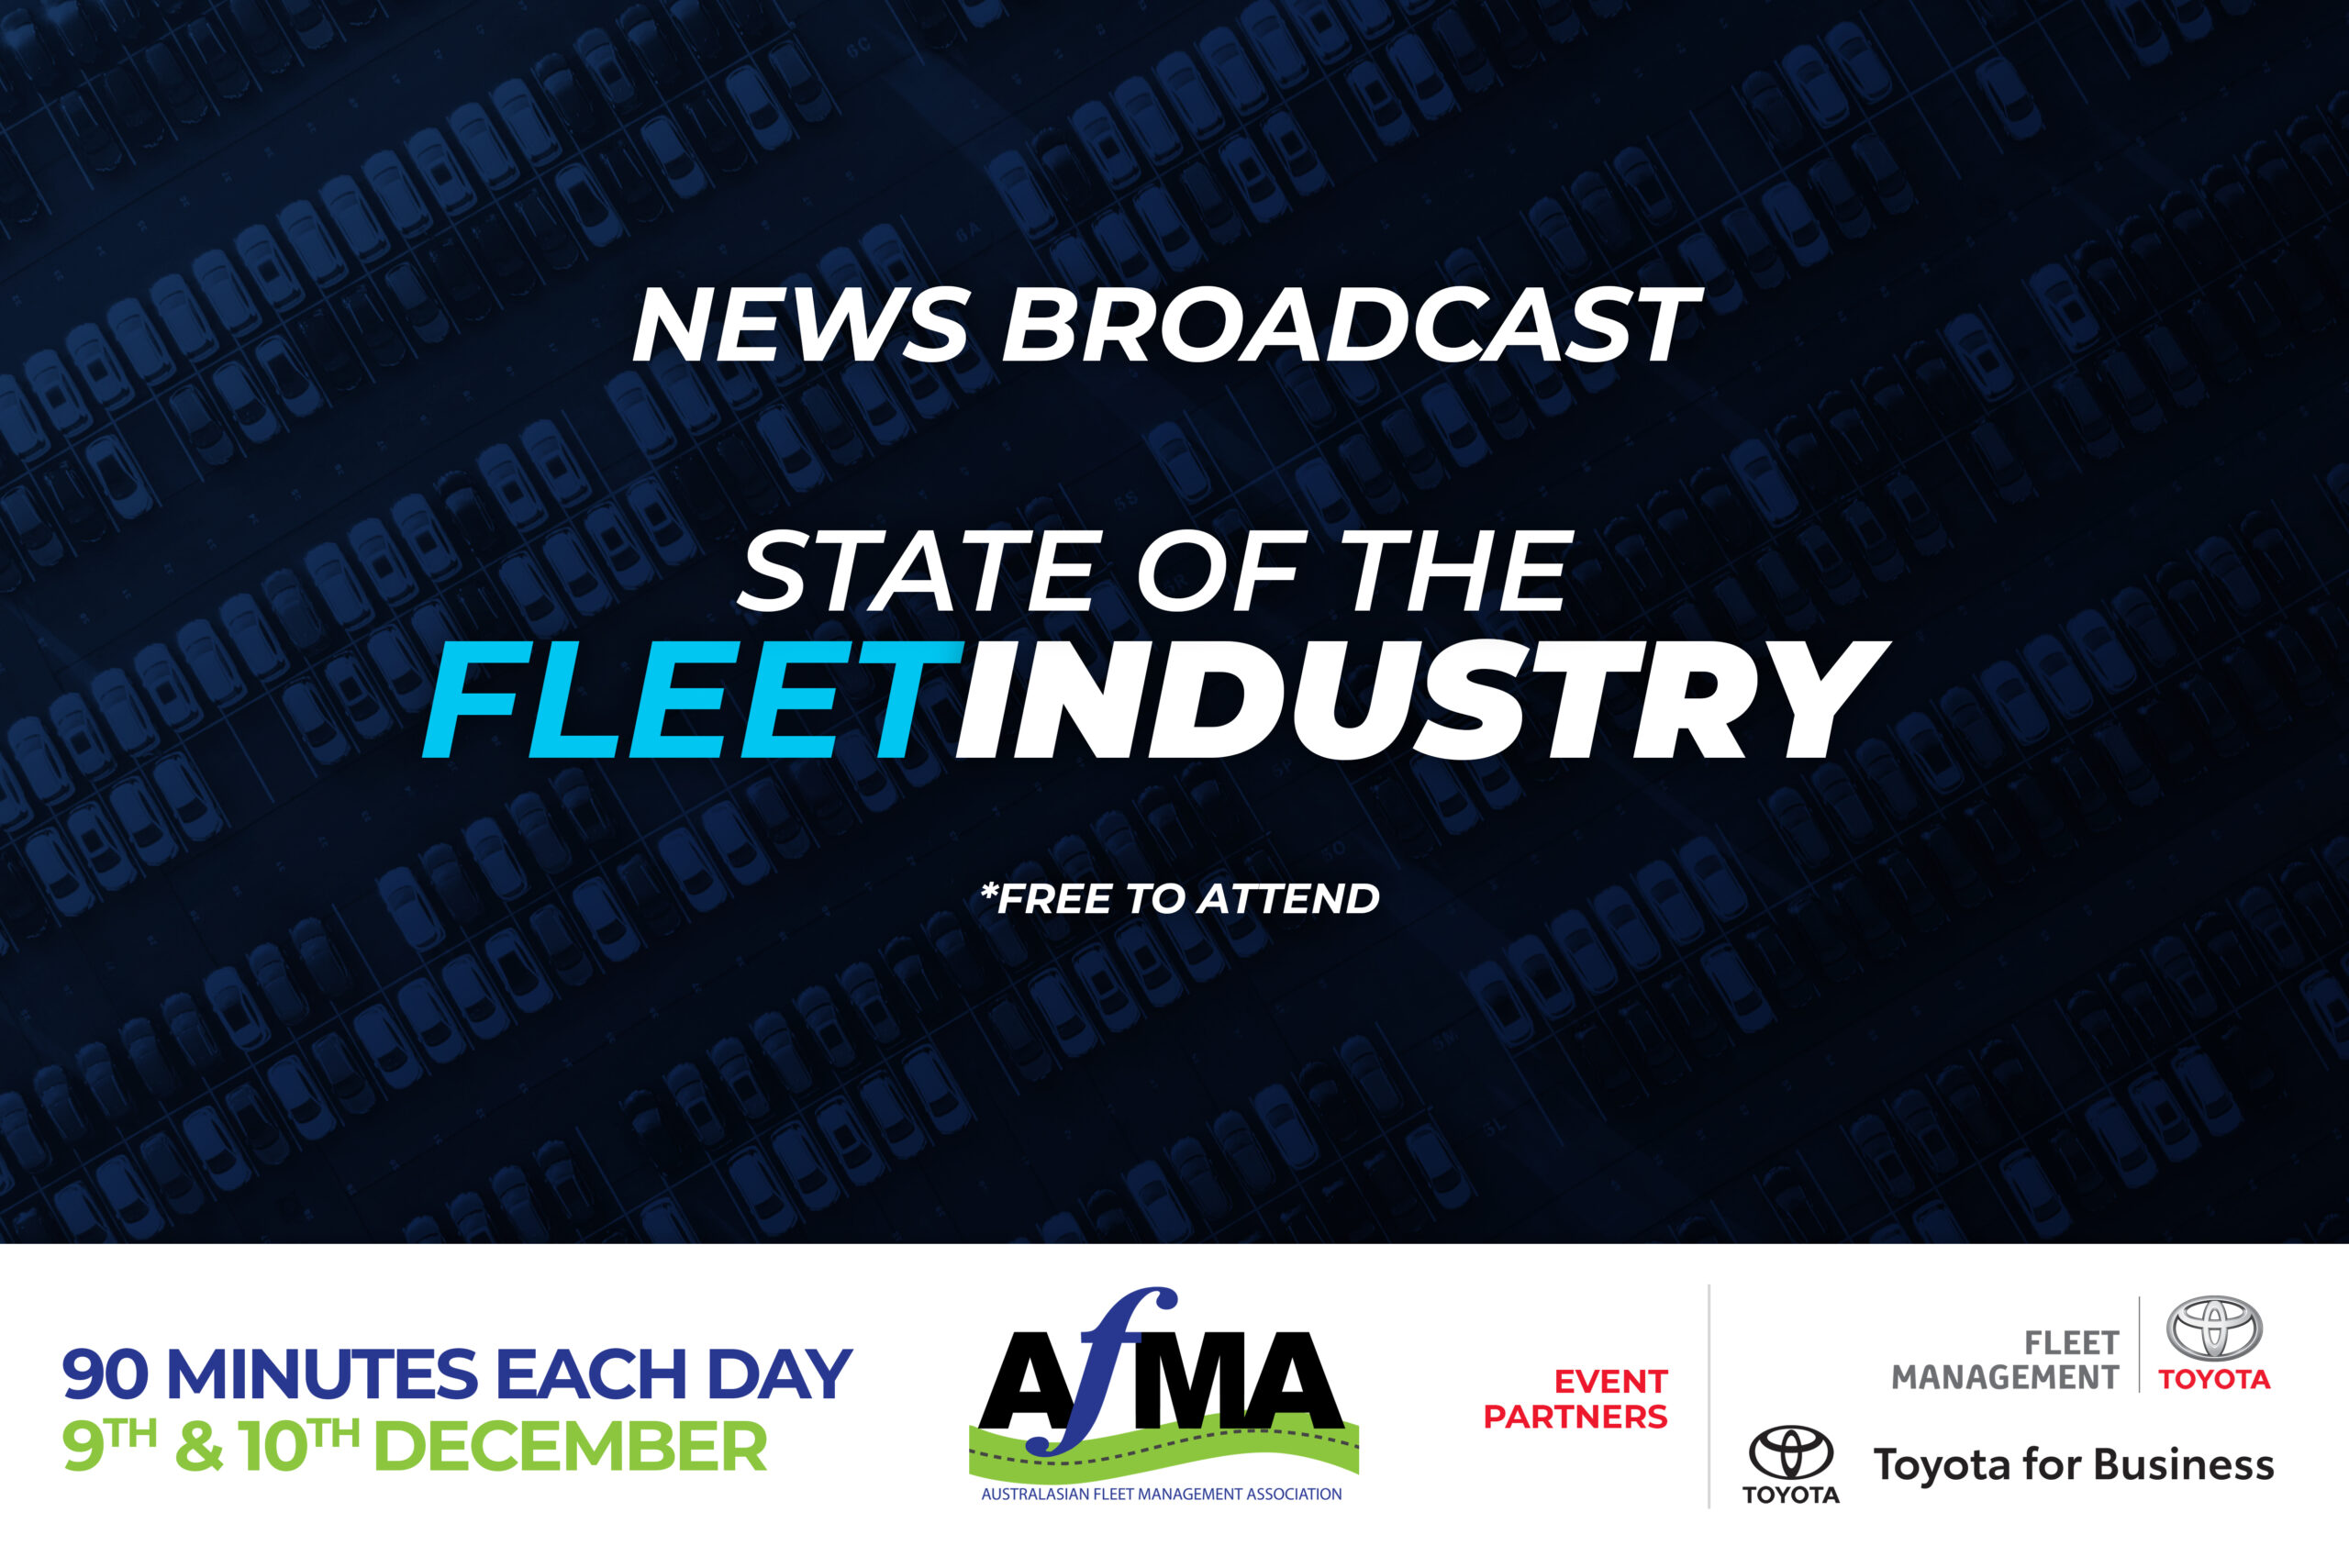 Topics revealed for AfMA’s State of the Fleet Industry news broadcast